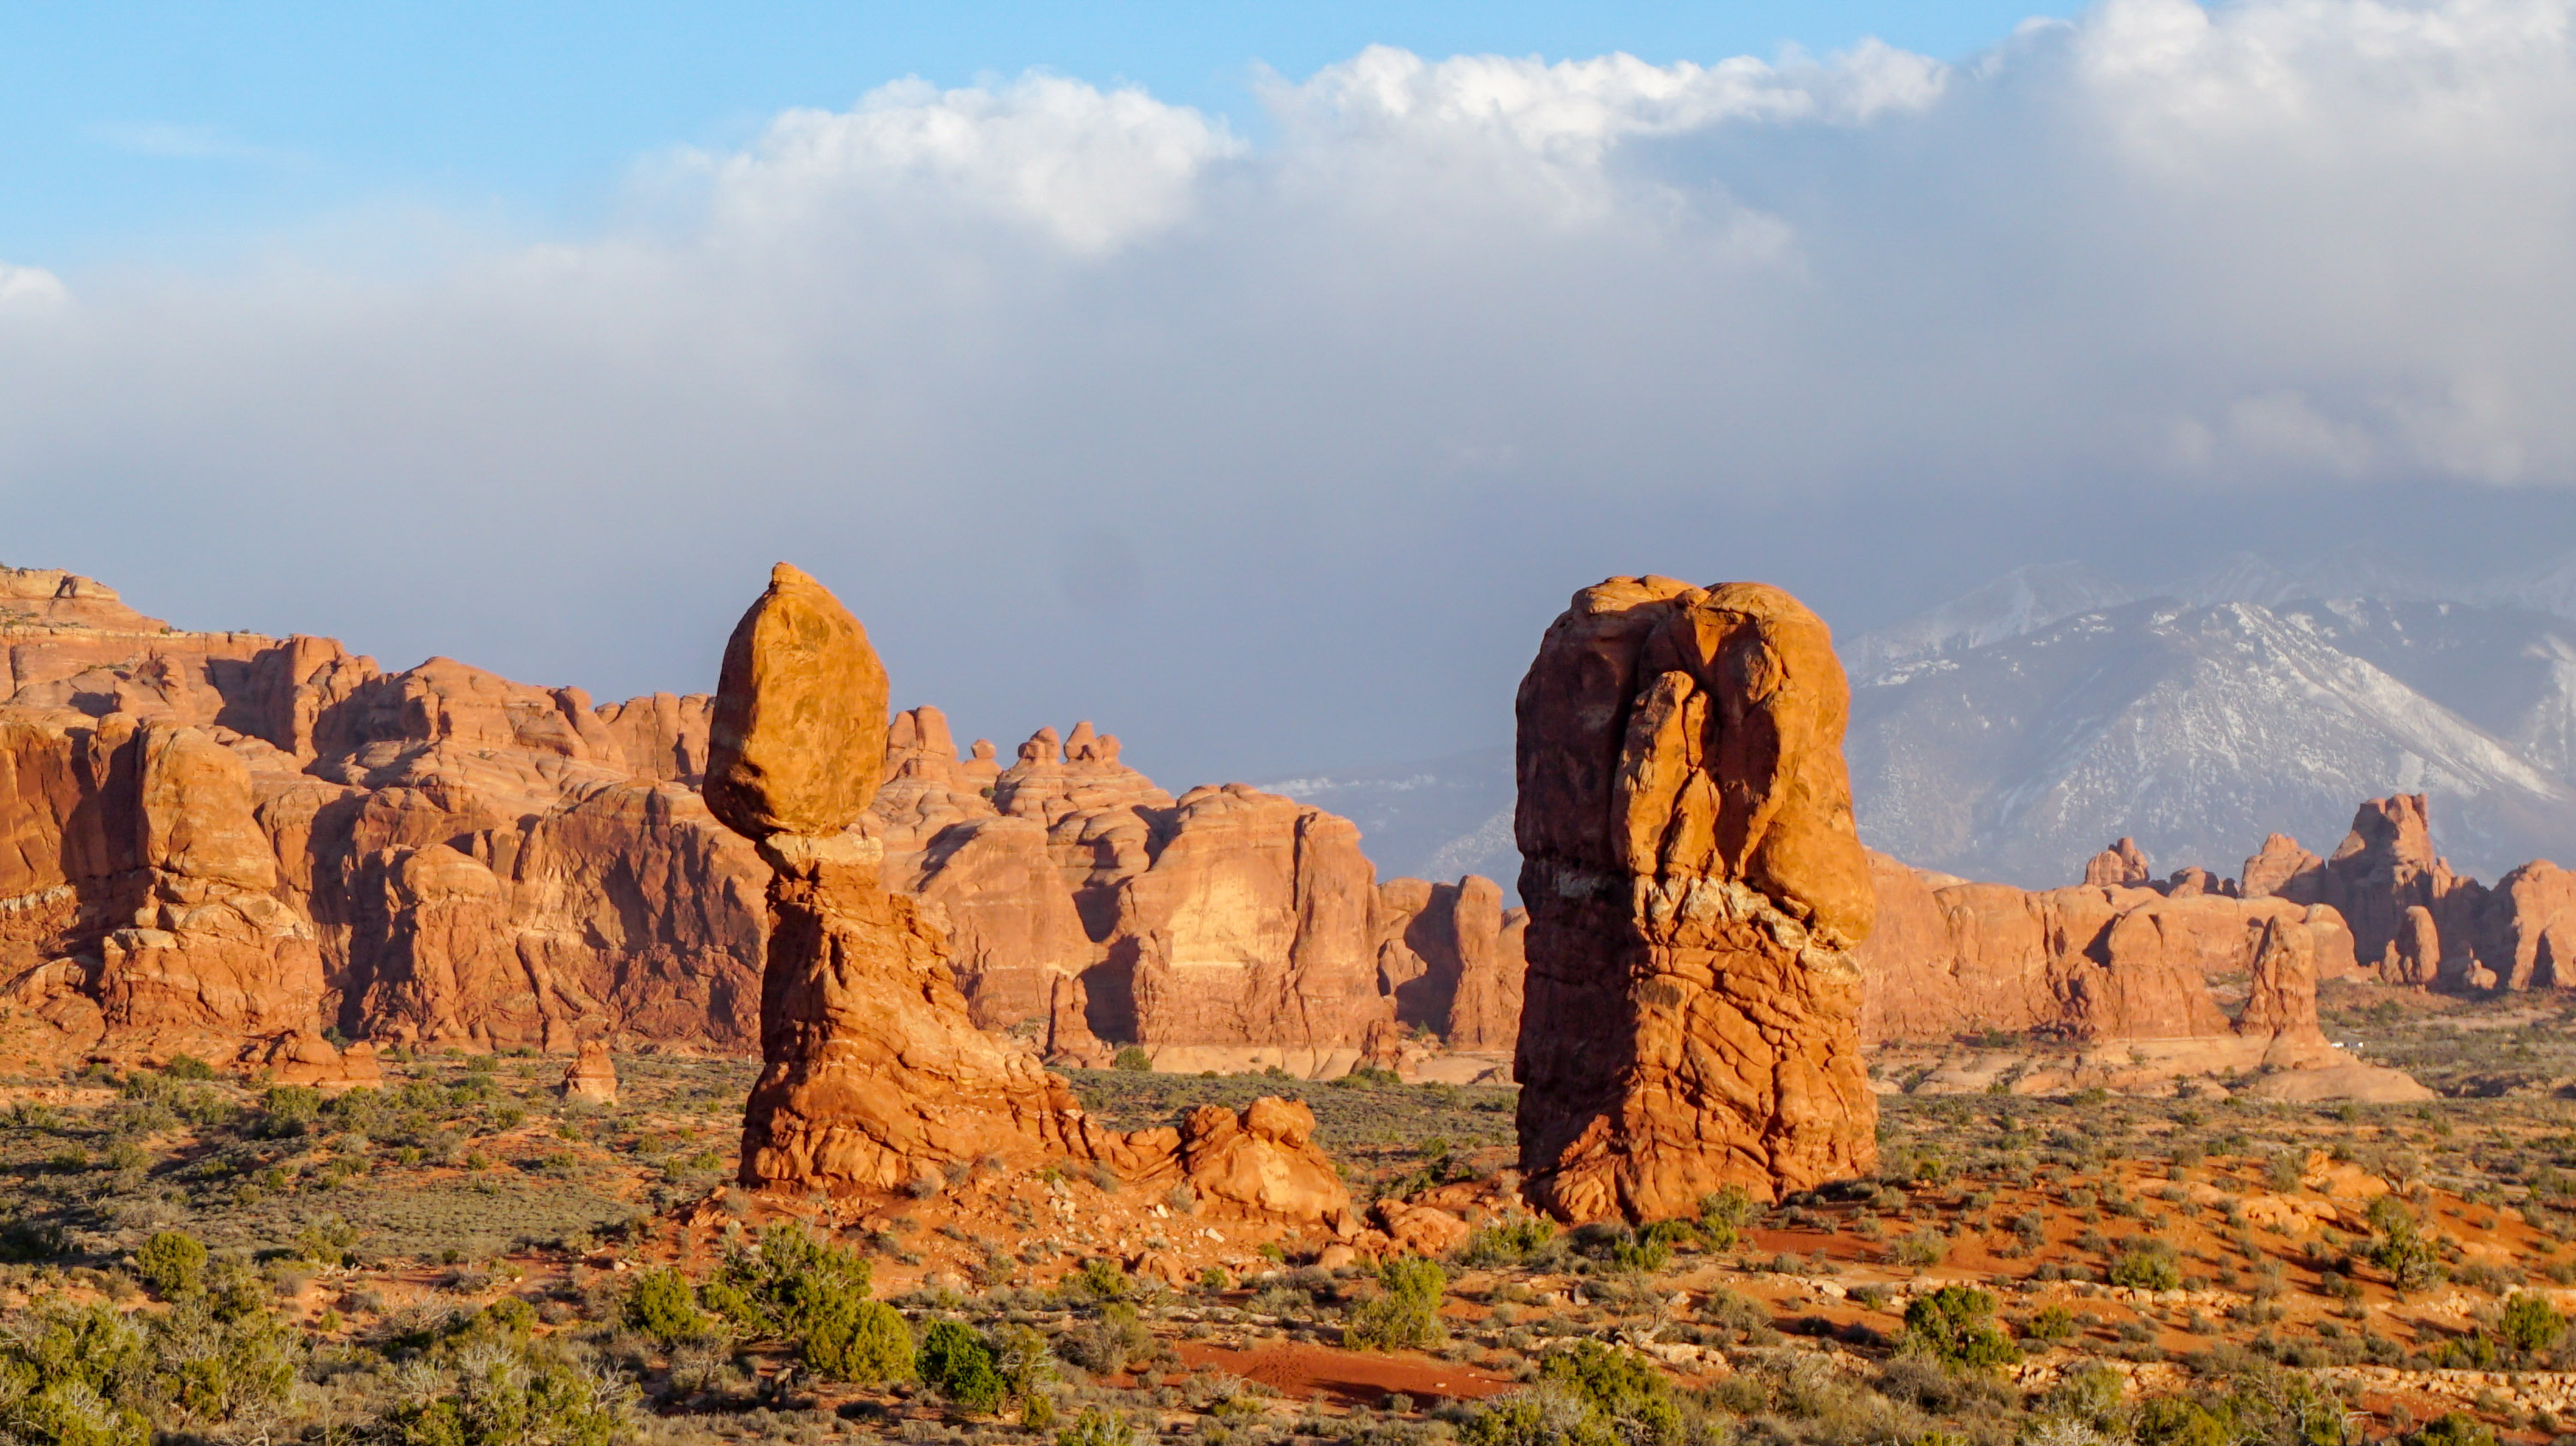 A Moab Day Trip: Dinosaur Tracks, Rock Formations, and Arches NP Blog Image